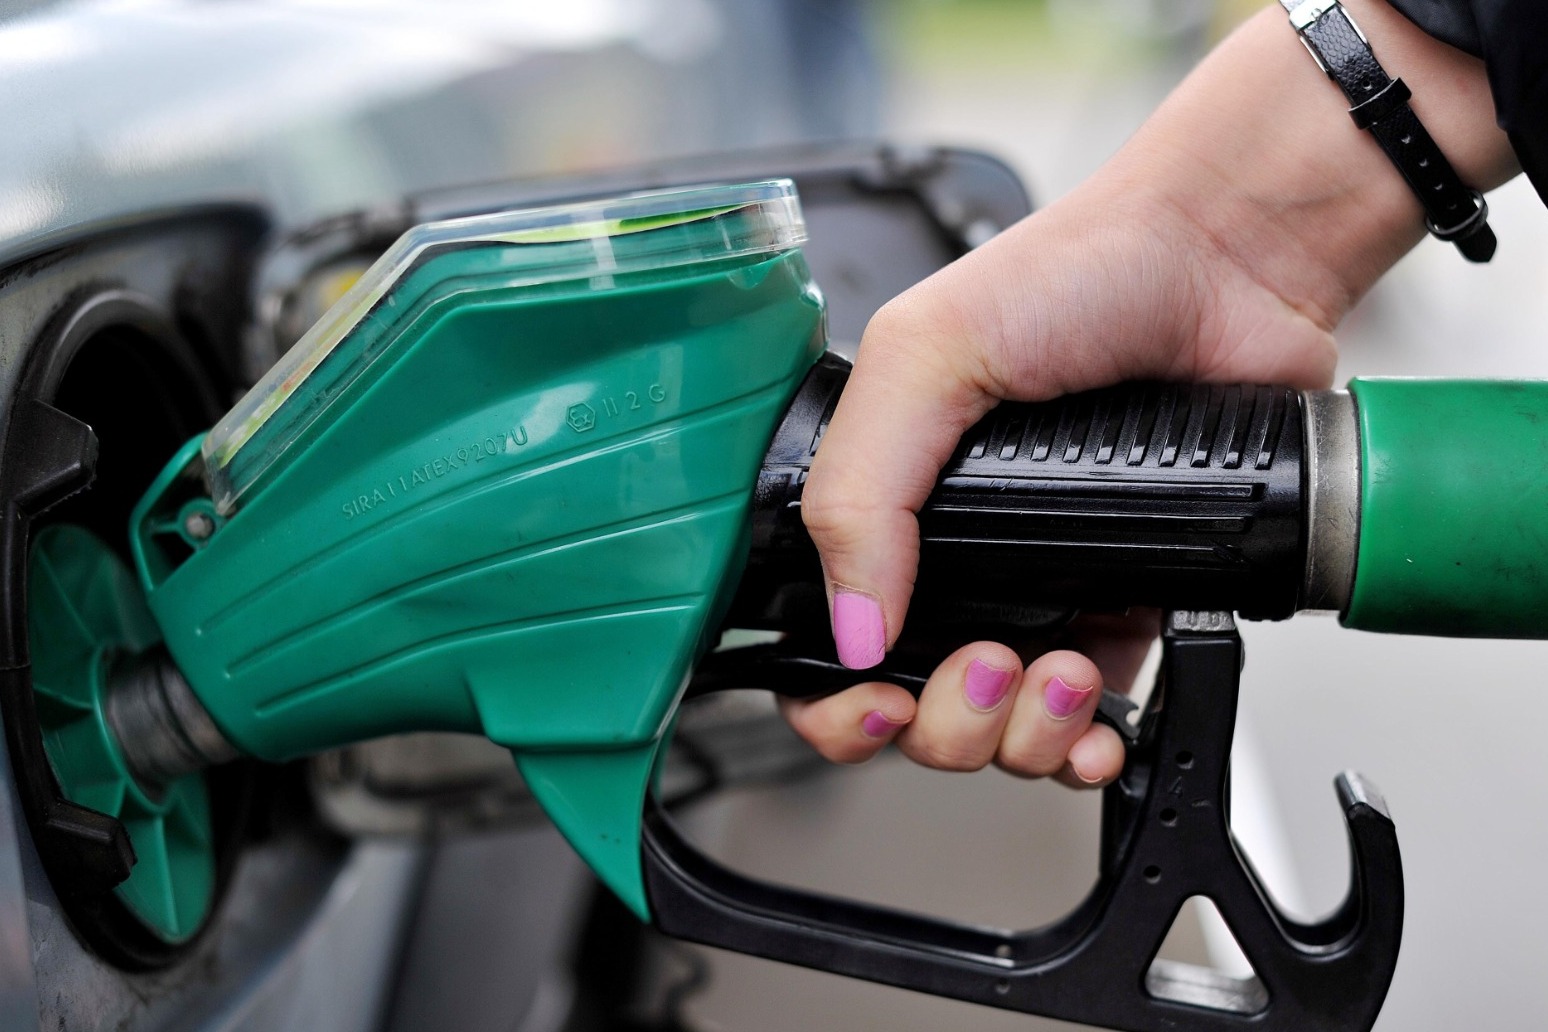 Big retailers failing to cut fuel prices in line with wholesale cost RAC warns